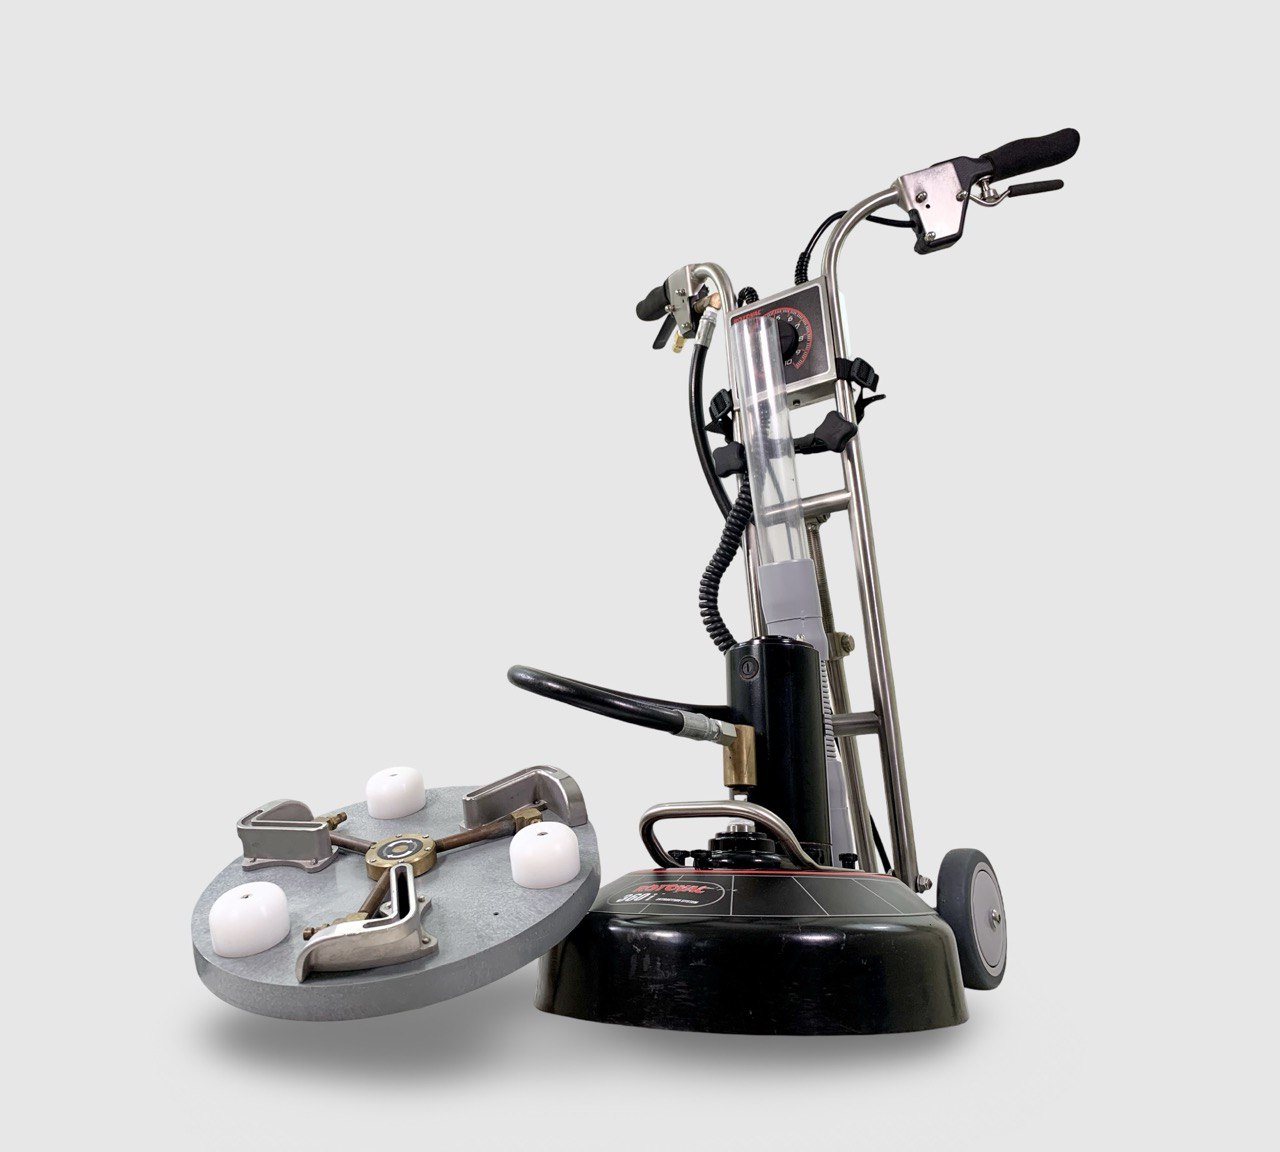 PRE-OWNED Rotovac 360i with Standard Carpet Cleaning Head